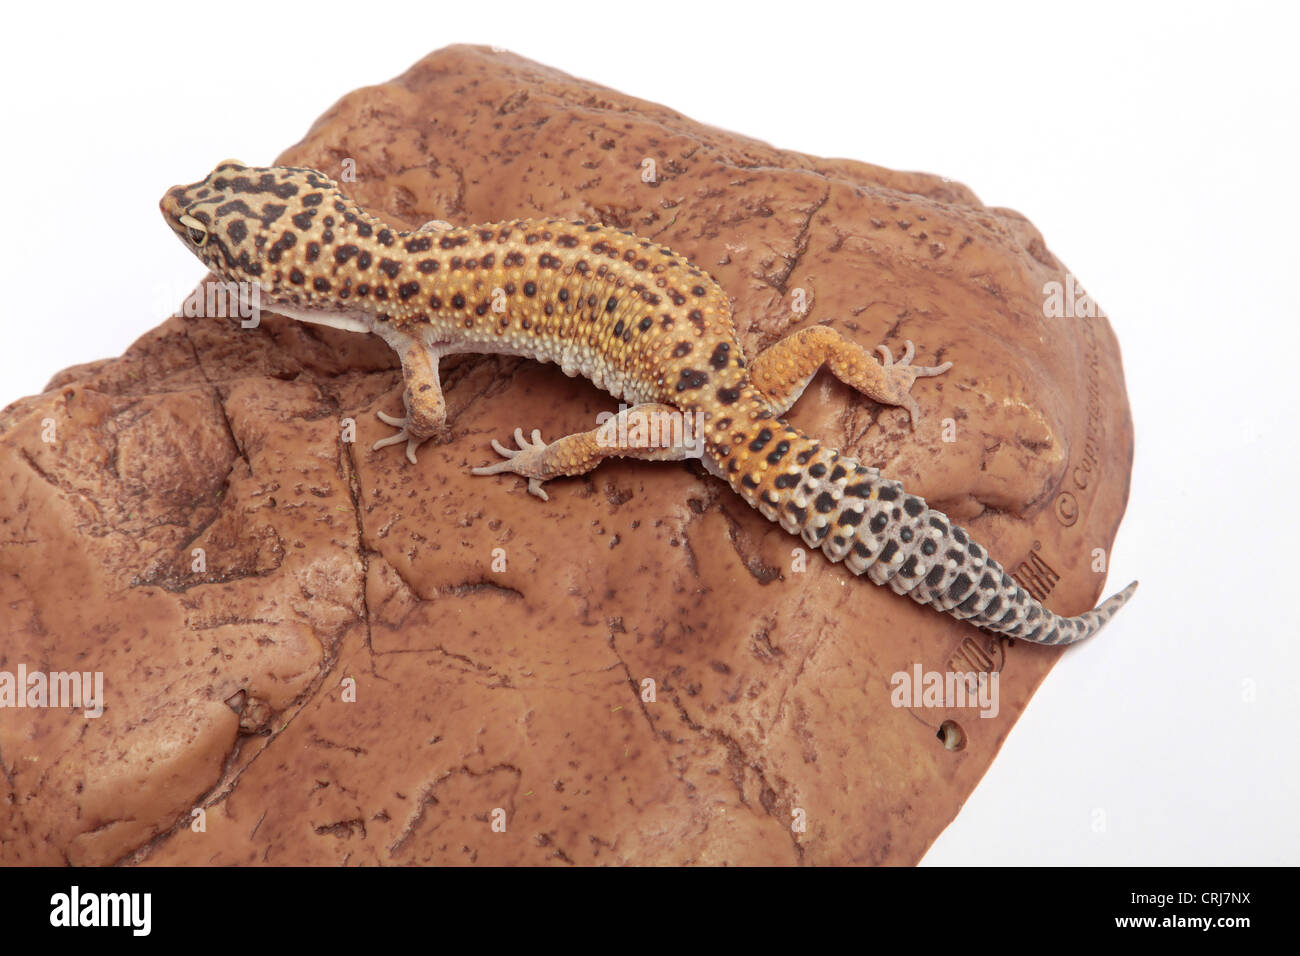 Leopard Gecko on a stone background Stock Photo